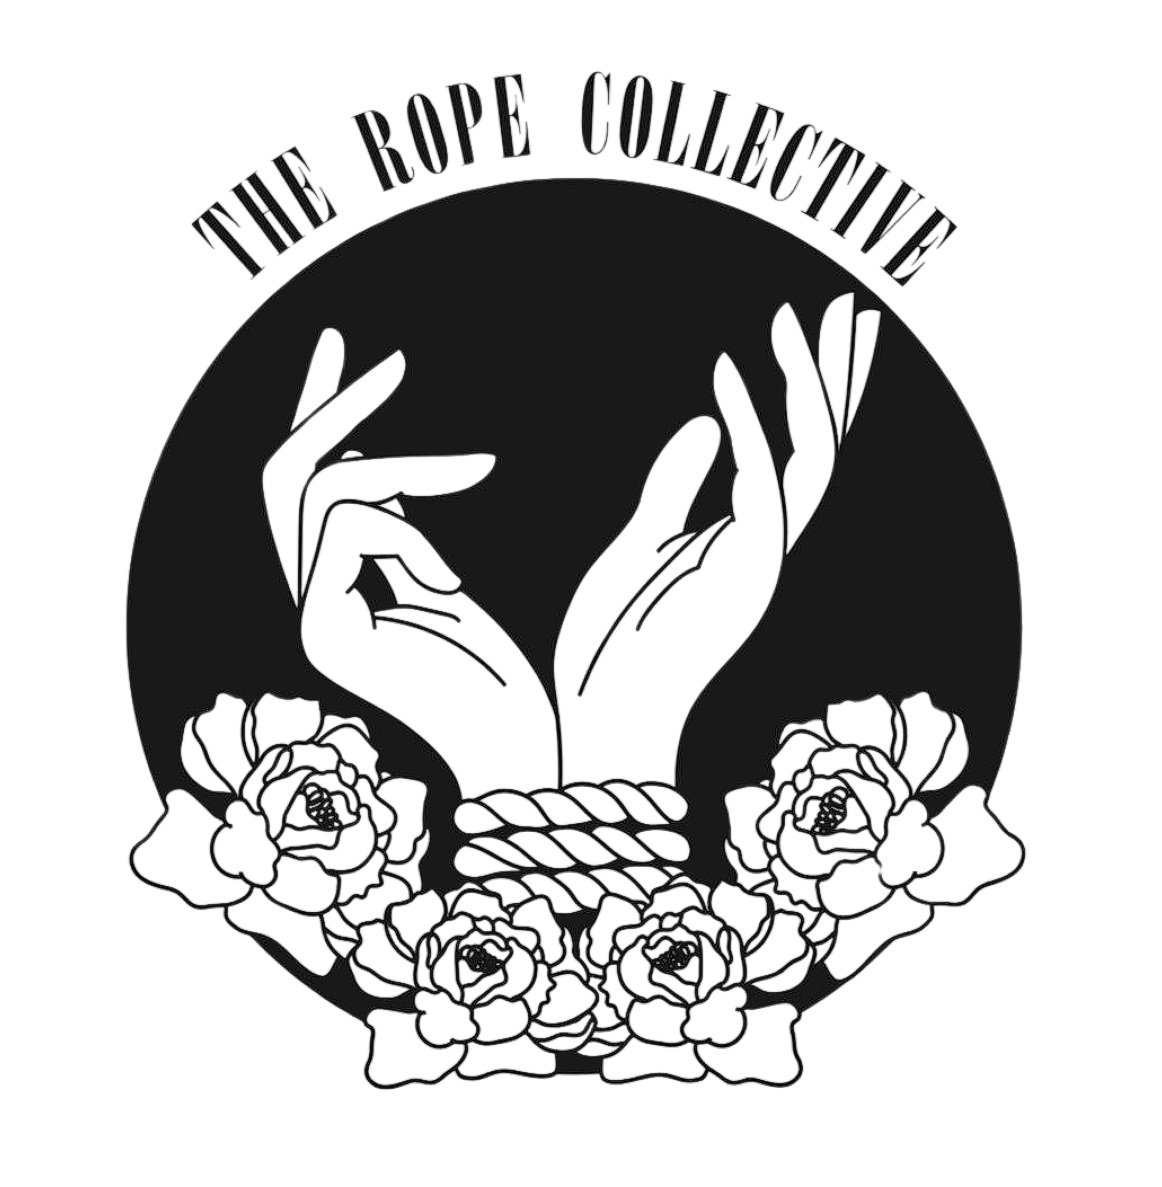 the Rope collective